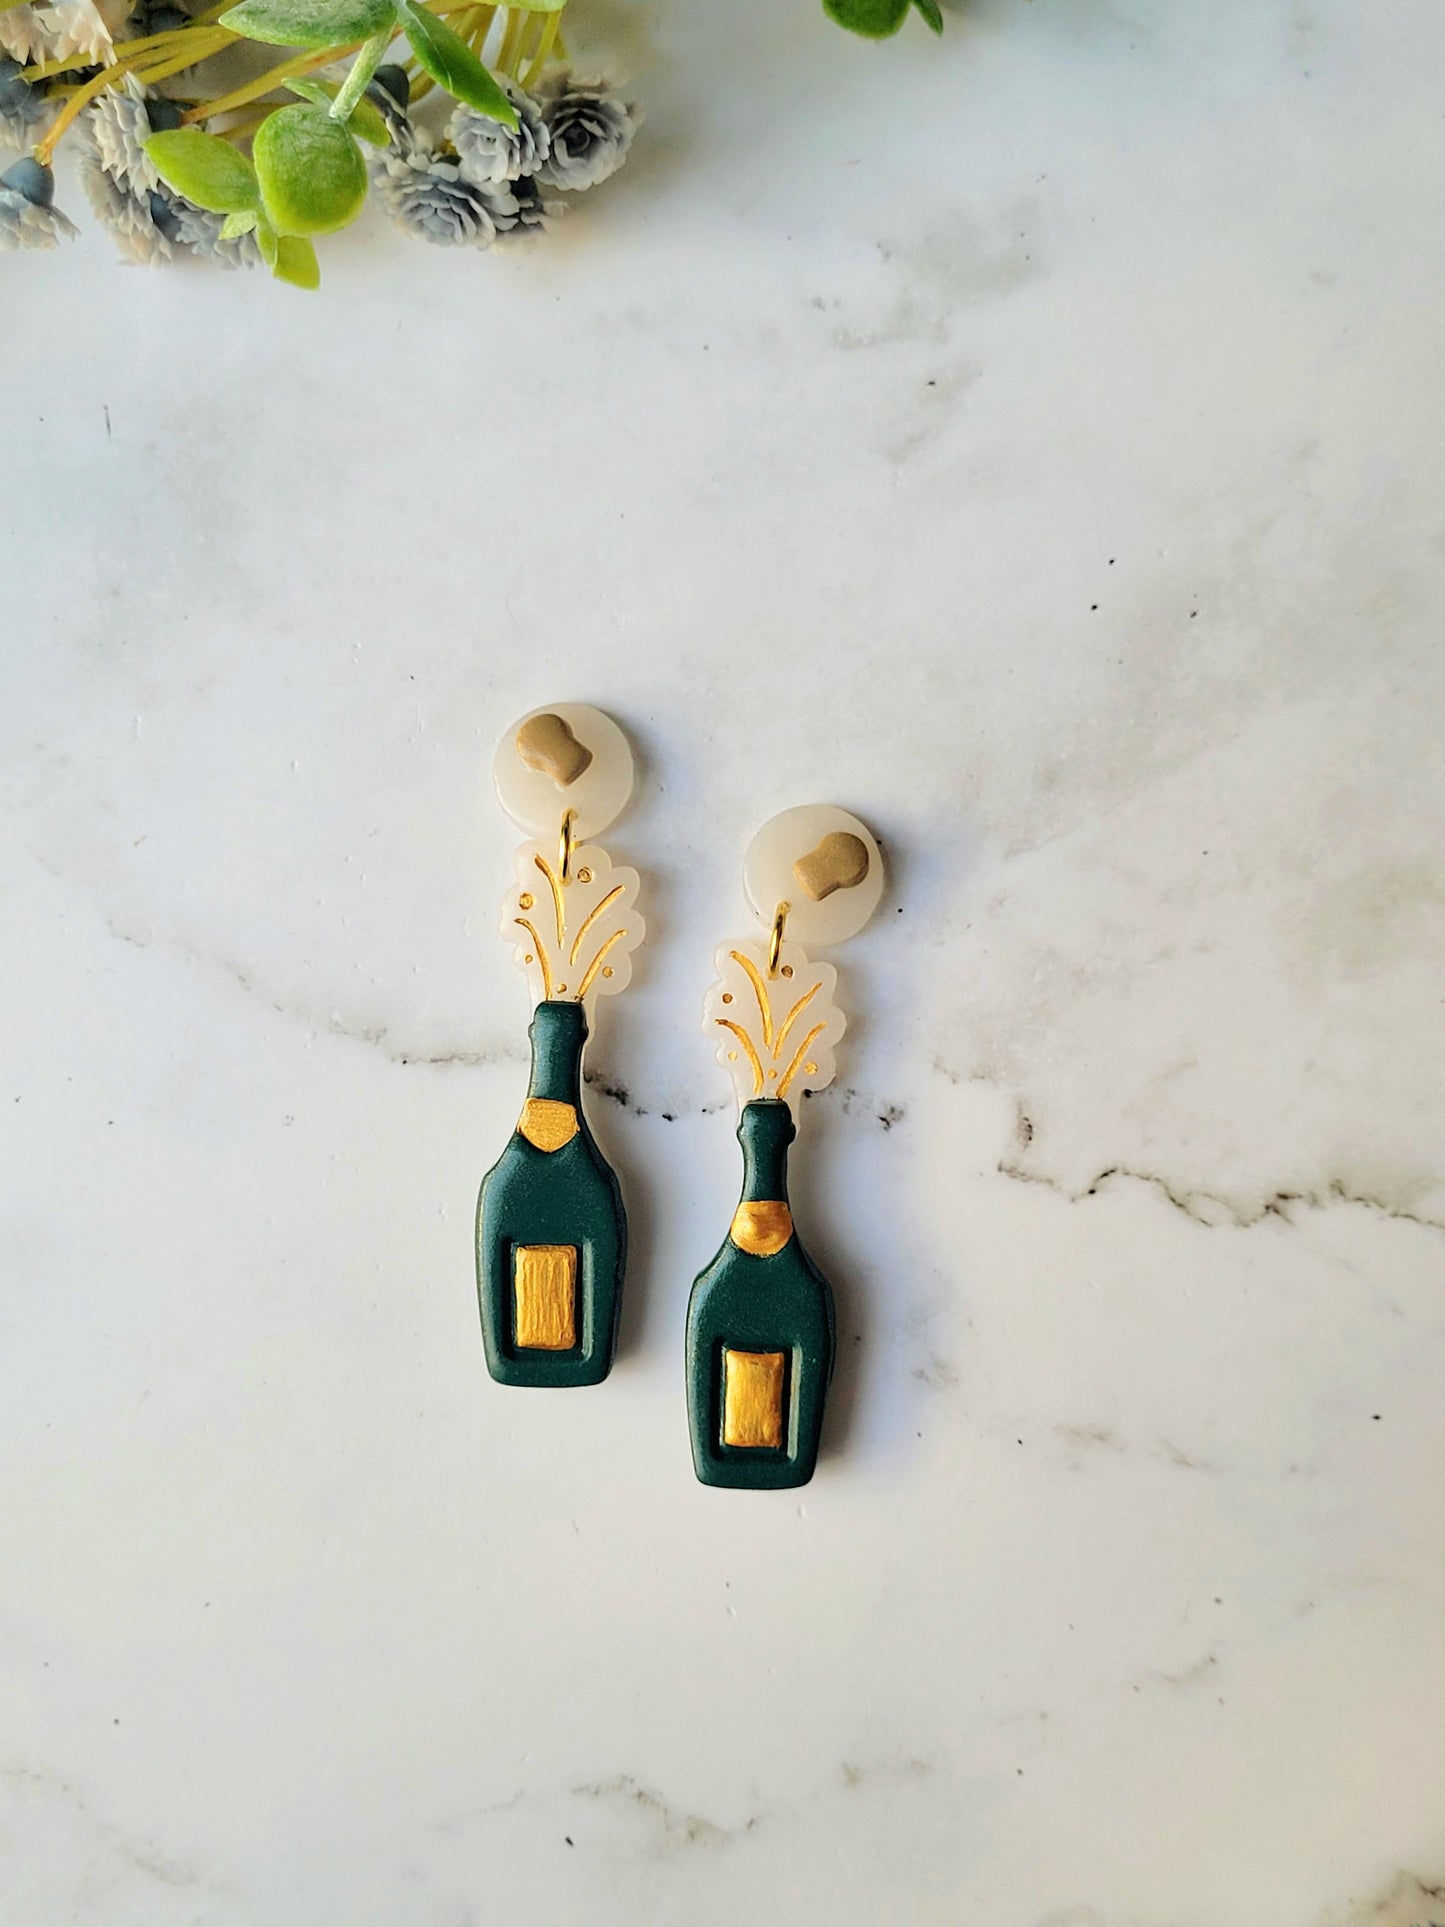 close up of the exploding champagne bottle with cork studs on a marble background.